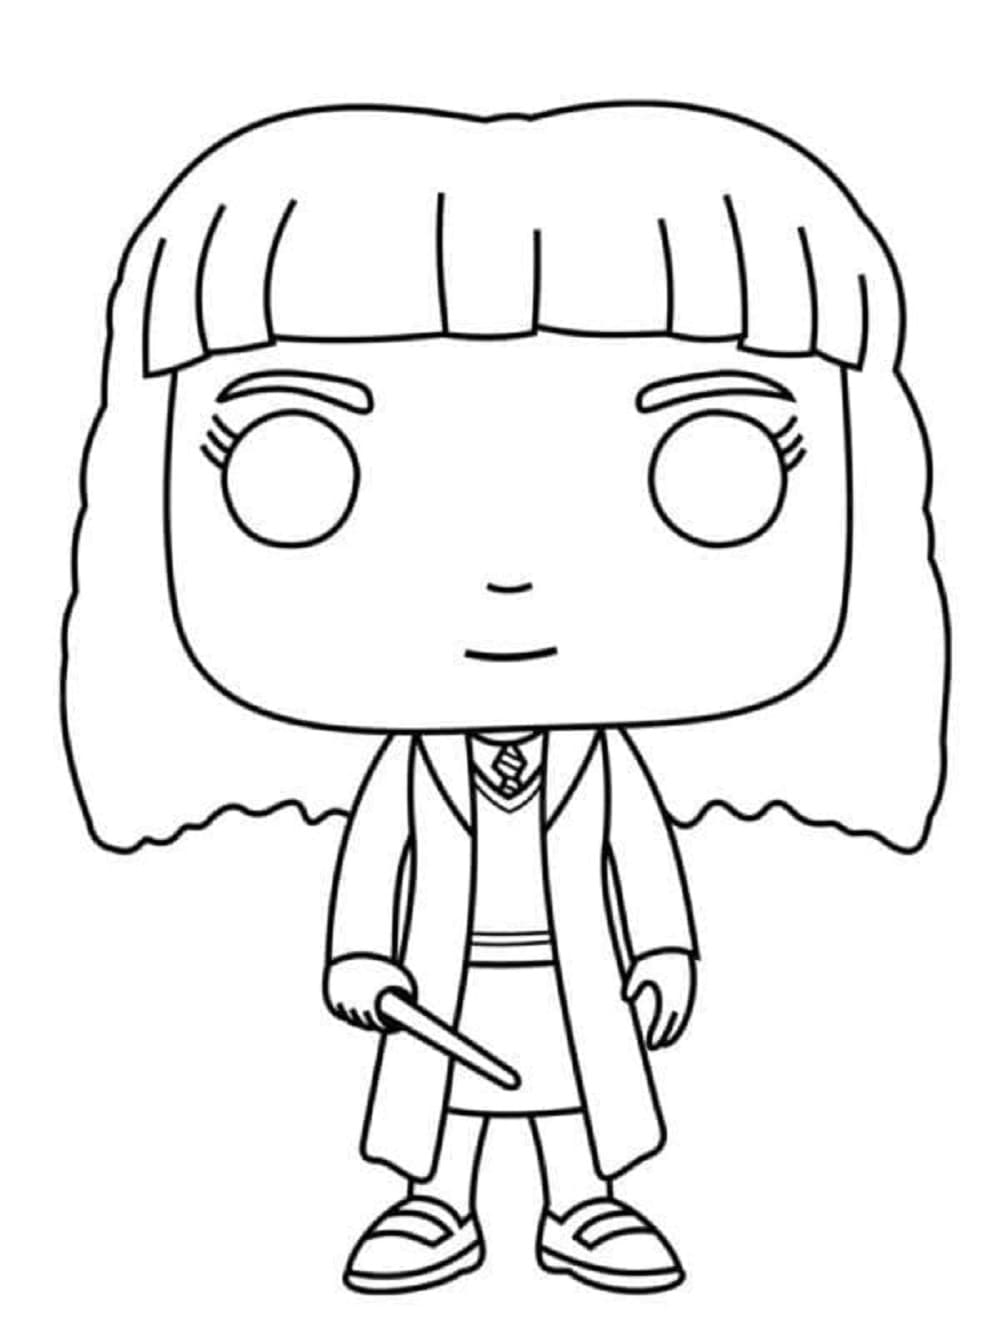 Printable Funko Pop Hermione Granger Coloring Page